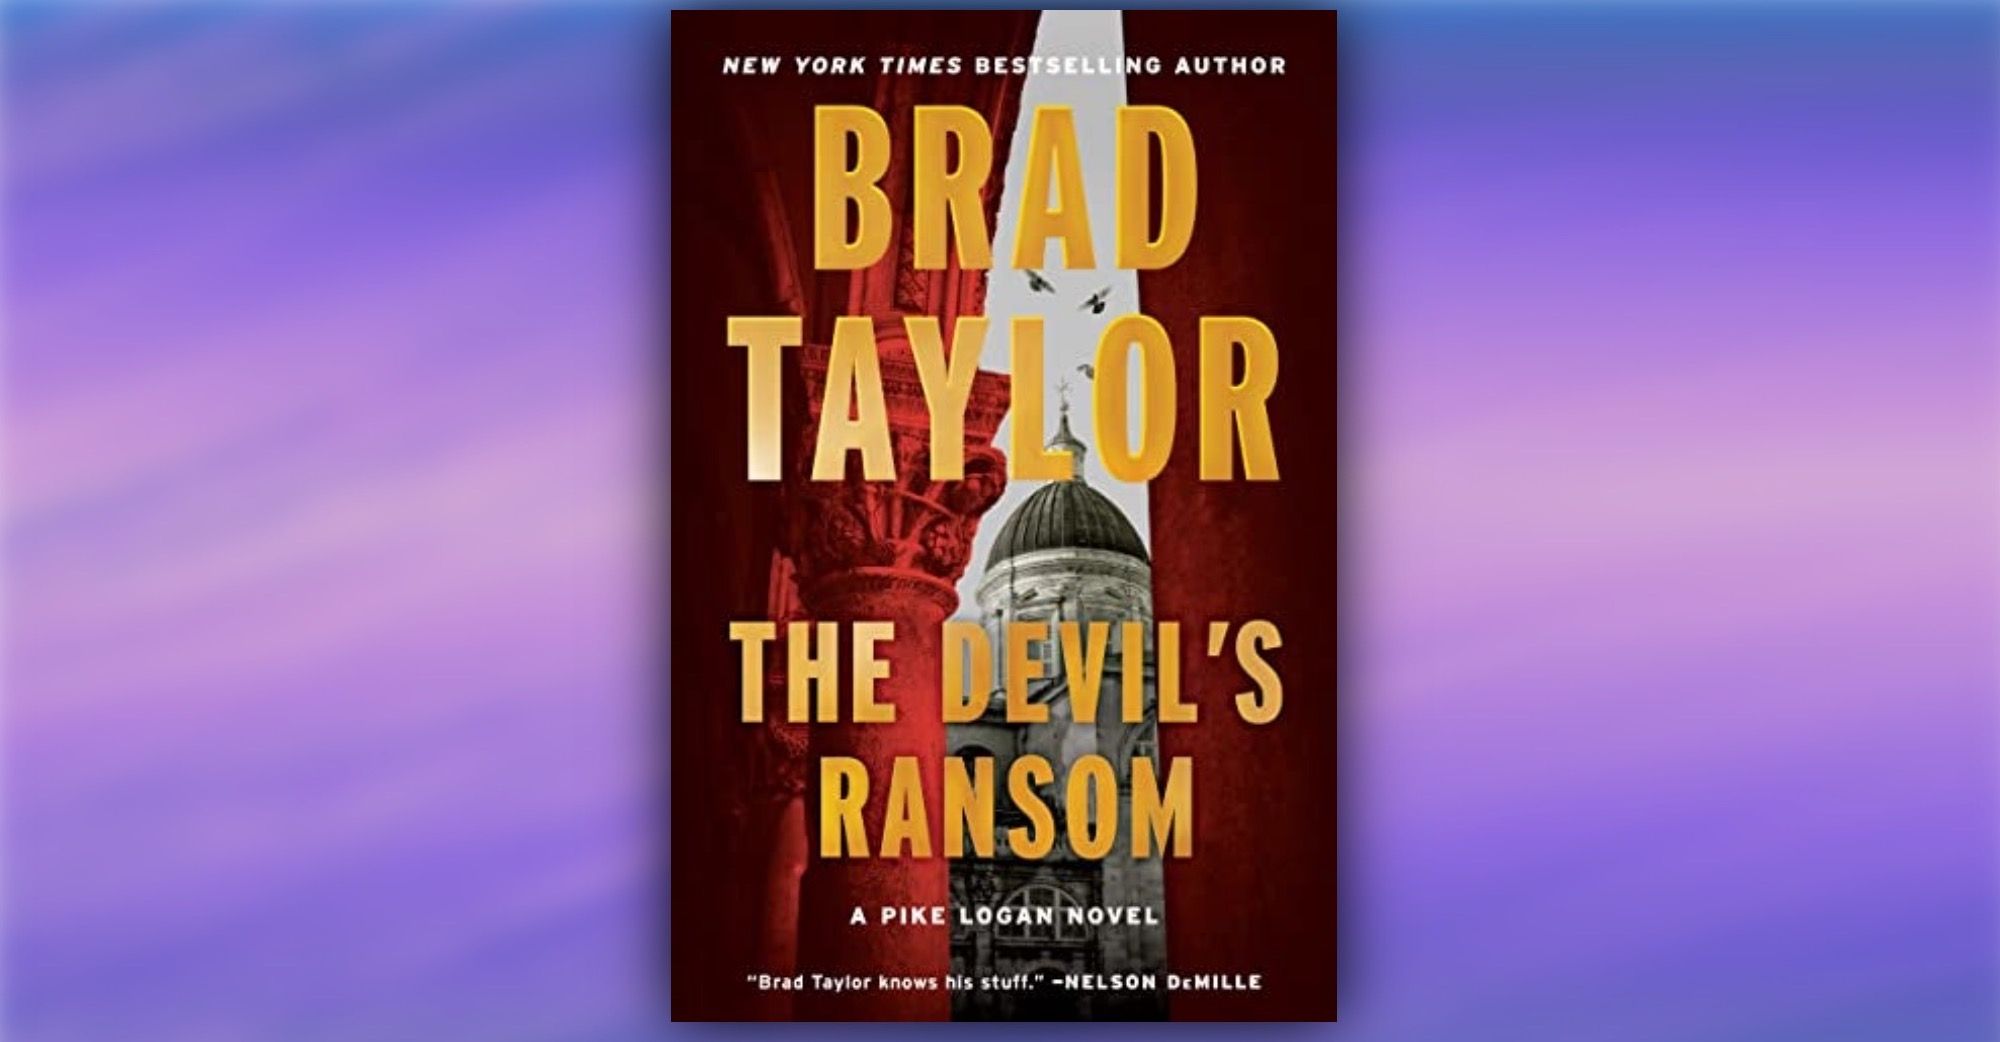 The Devil's Ransom - Book Review